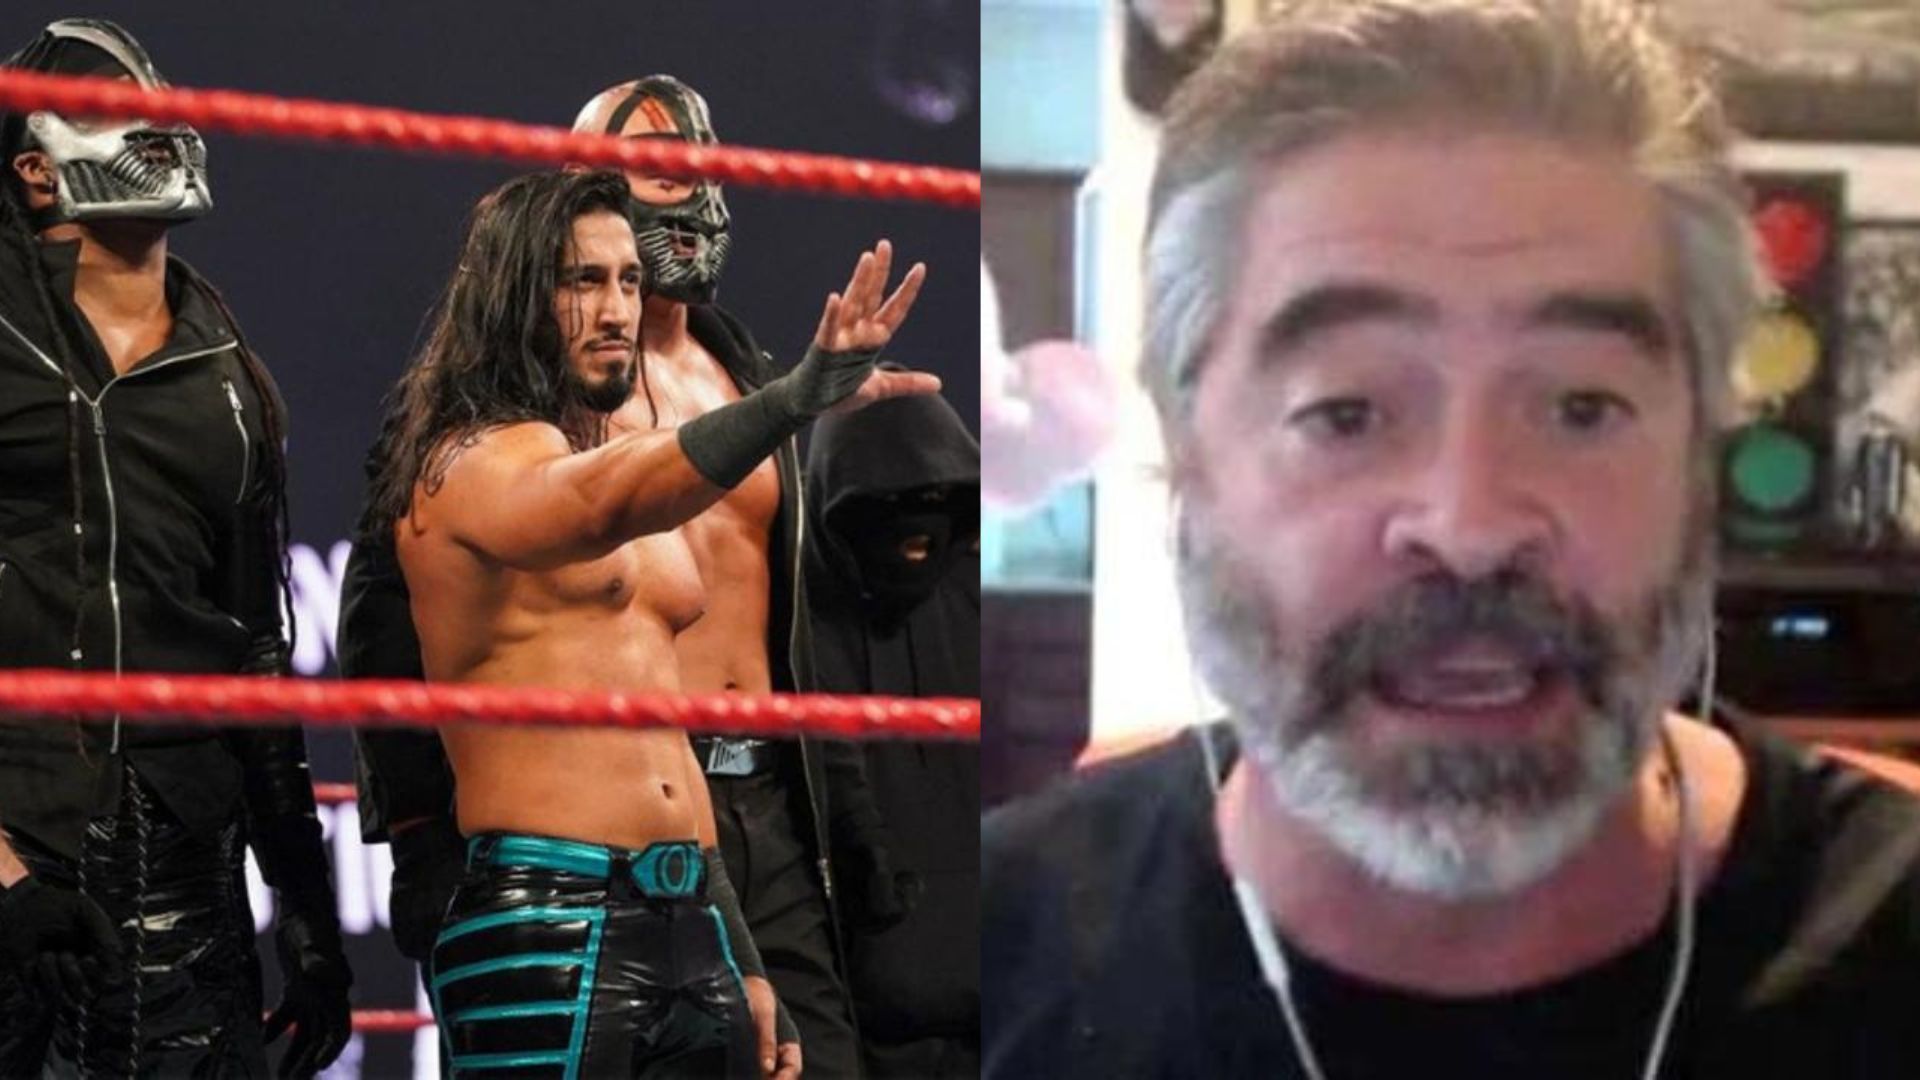 Vince Russo recently criticized Mustafa Ali for his character and gimmick